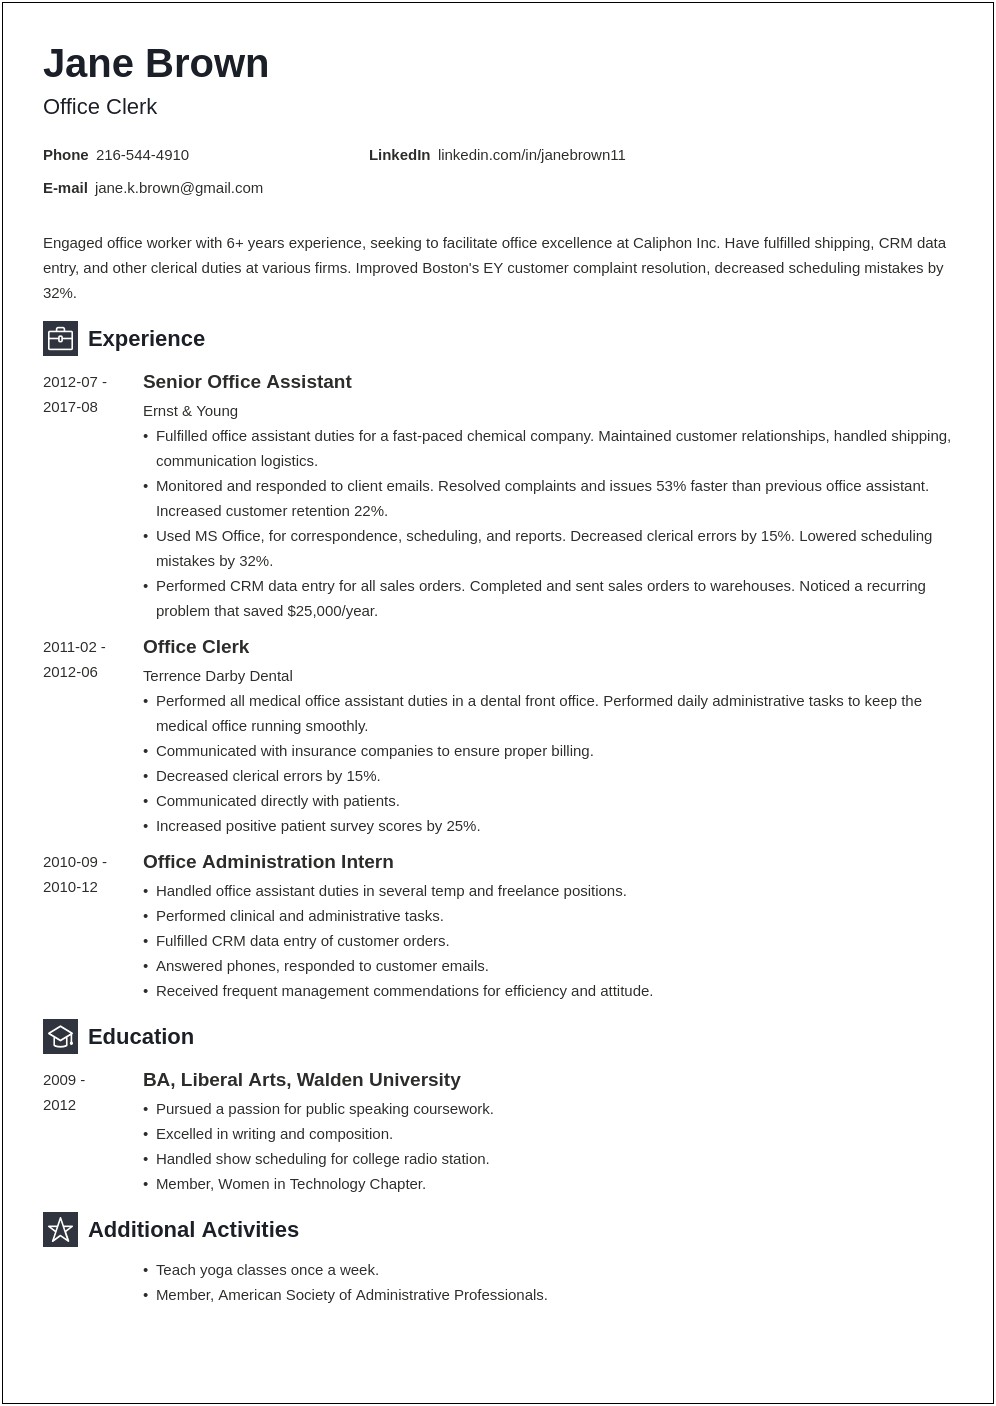 A Professional Resume For Clerical Worker